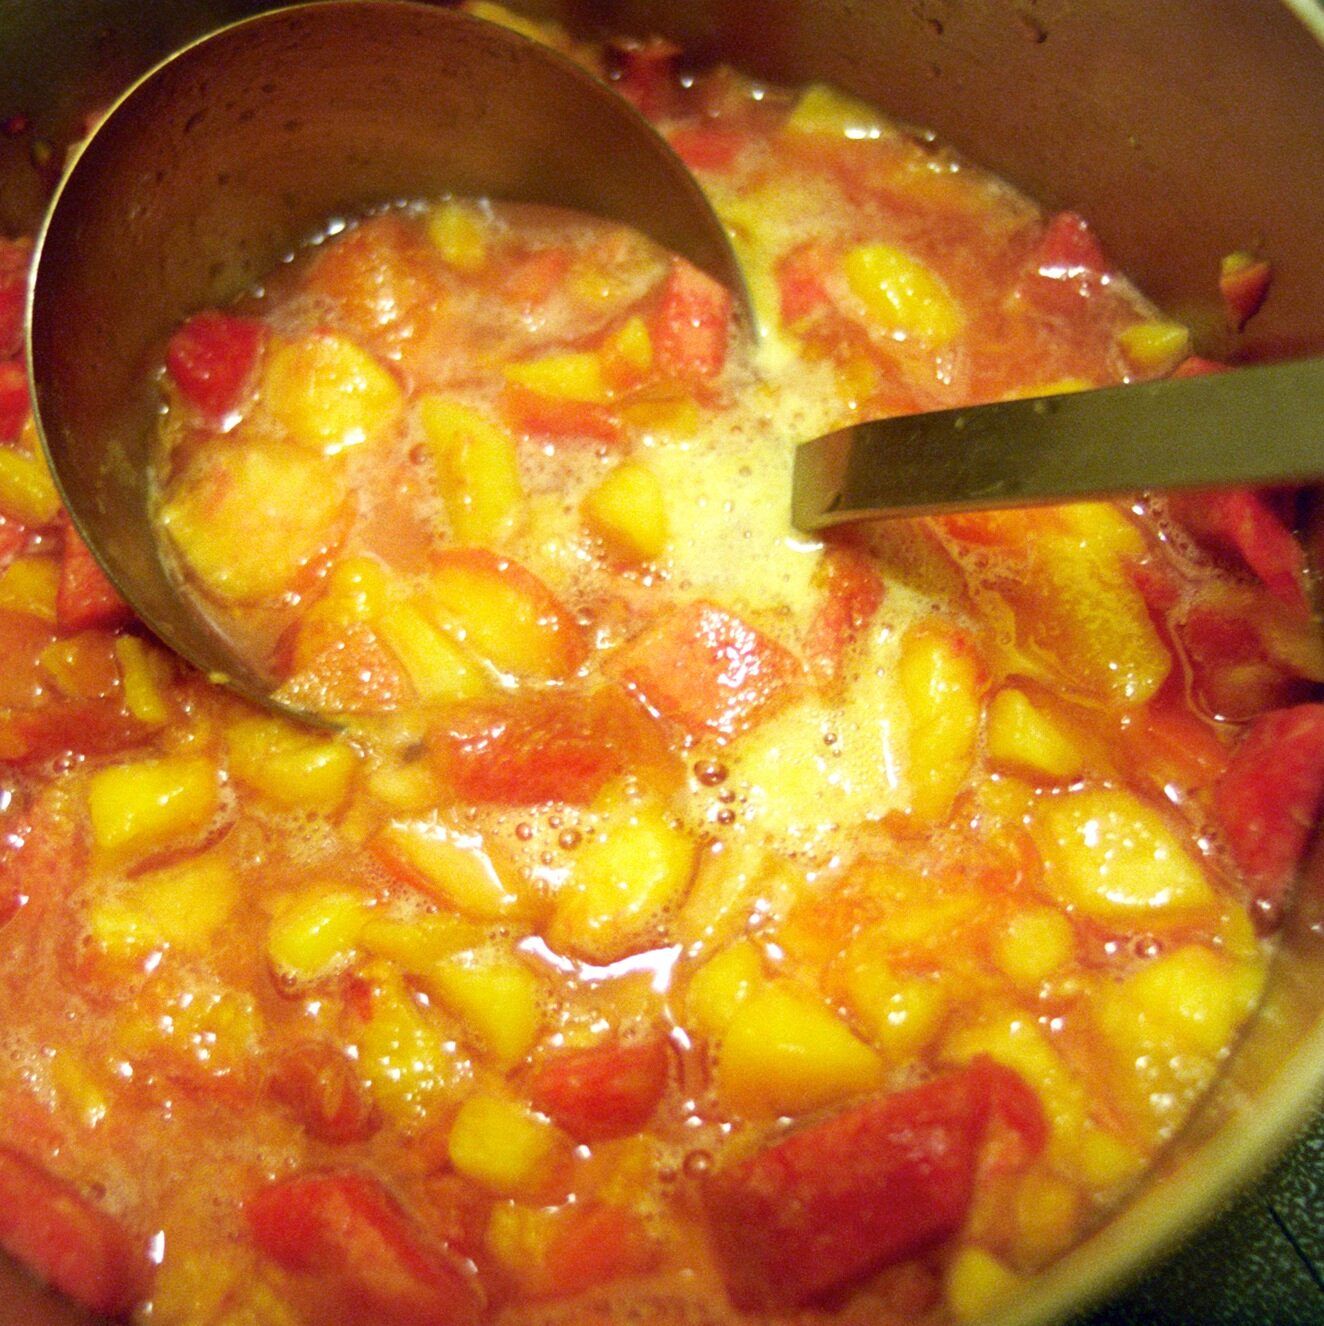 Peaches Cooking for Jam